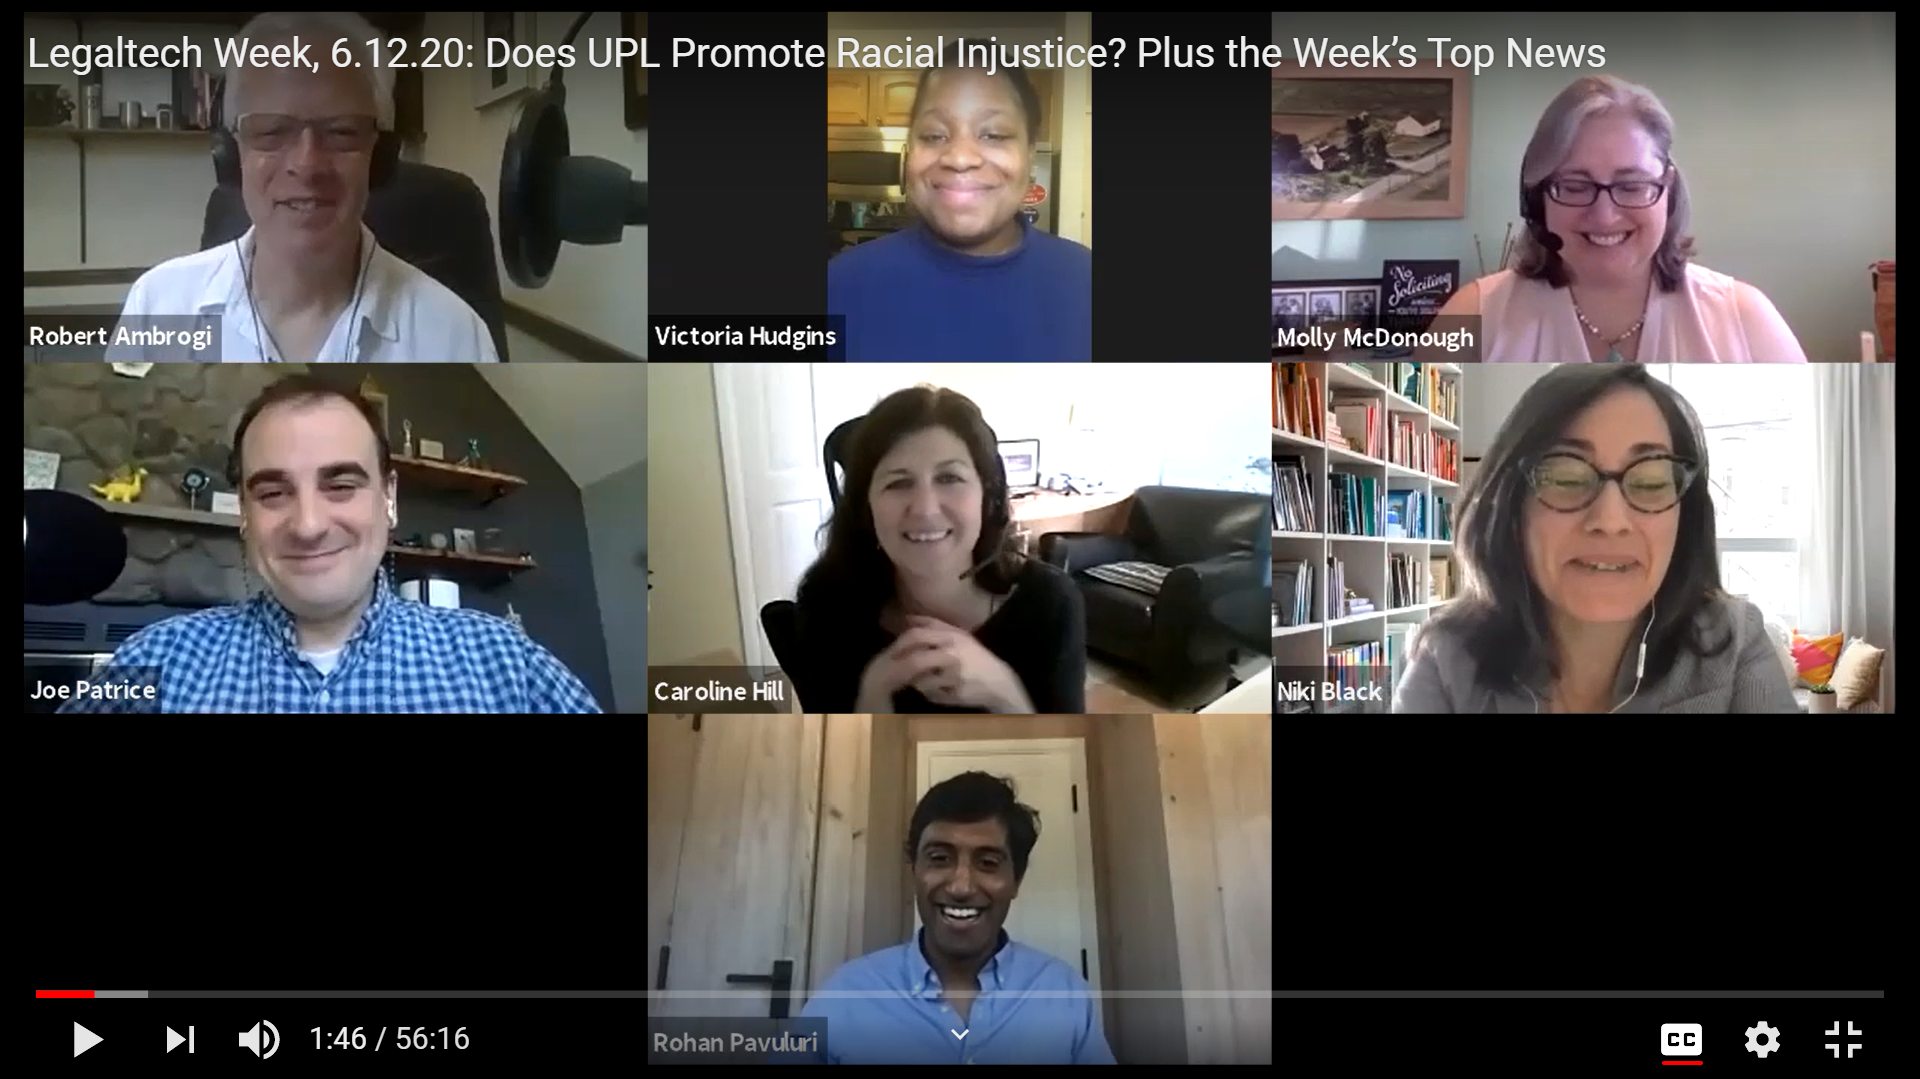 Legaltech Week, 6.12.20: Does UPL Promote Racial Injustice? Plus the Week’s Top News